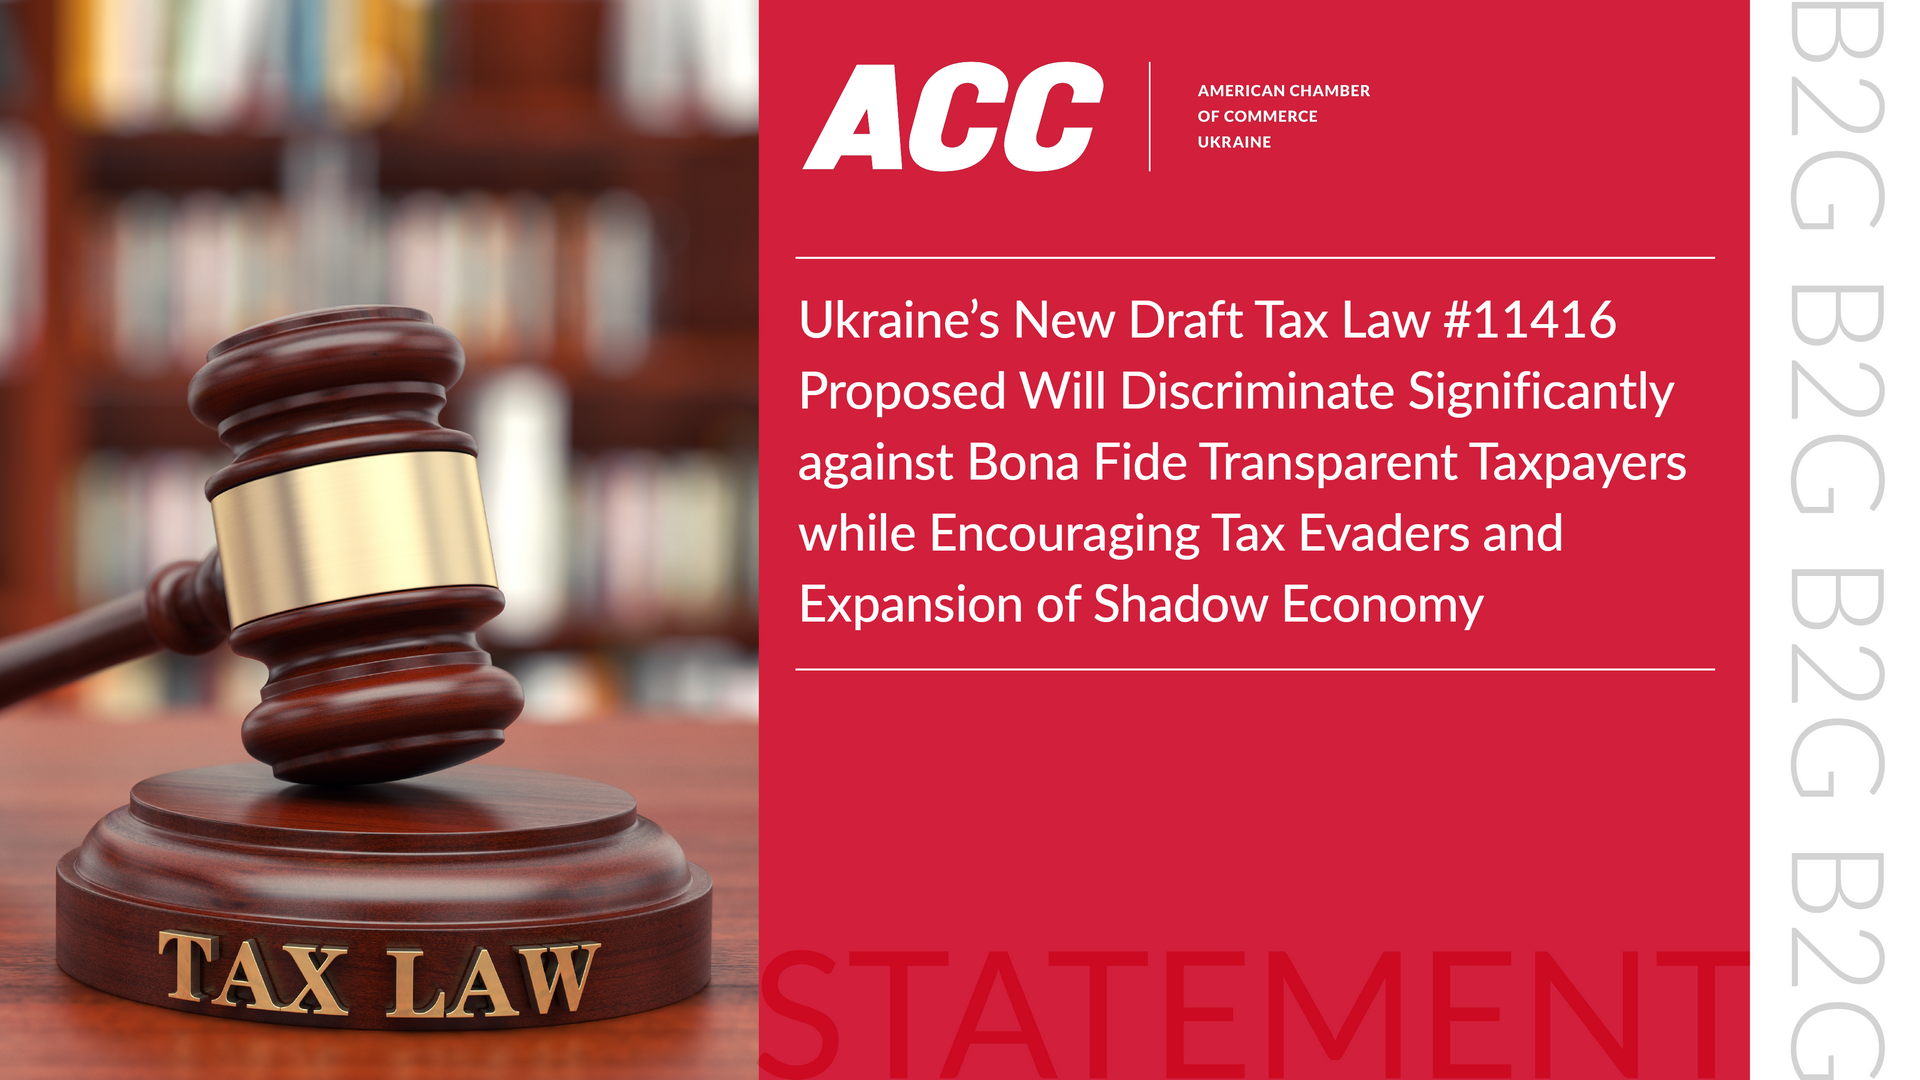 Ukraine’s New Draft Tax Law #11416 Proposed Will Discriminate Significantly against Bona Fide Transparent Taxpayers while Encouraging Tax Evaders and Expansion of Shadow Economy